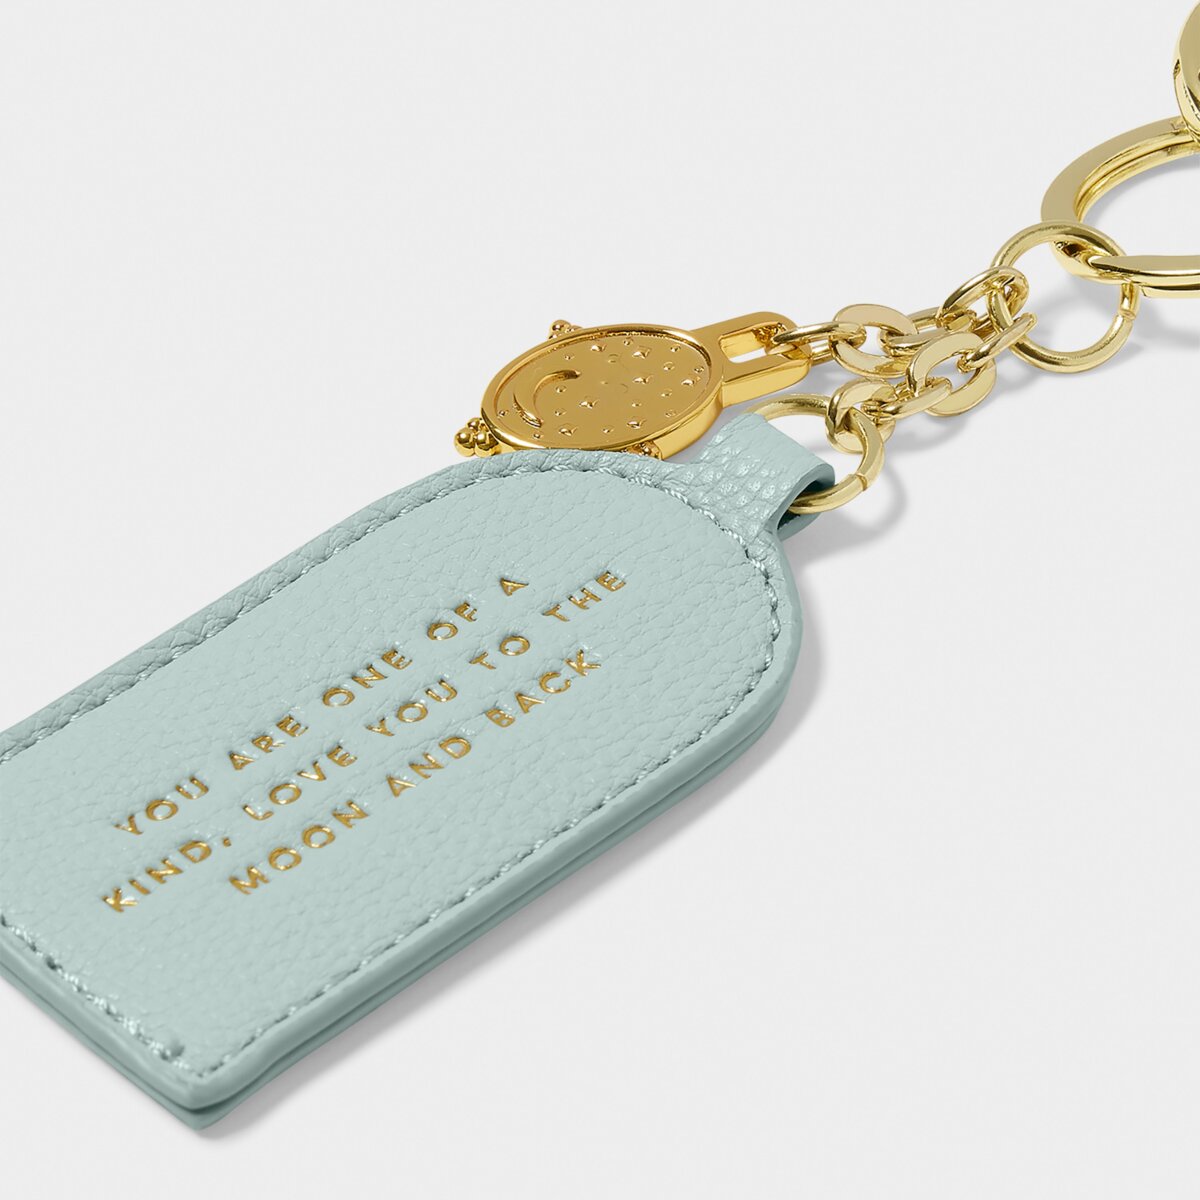 Pale blue keyring with gold charm and gold hardware rings with gold foiled 'Love You To The Moon and Back' sentiment close up picture